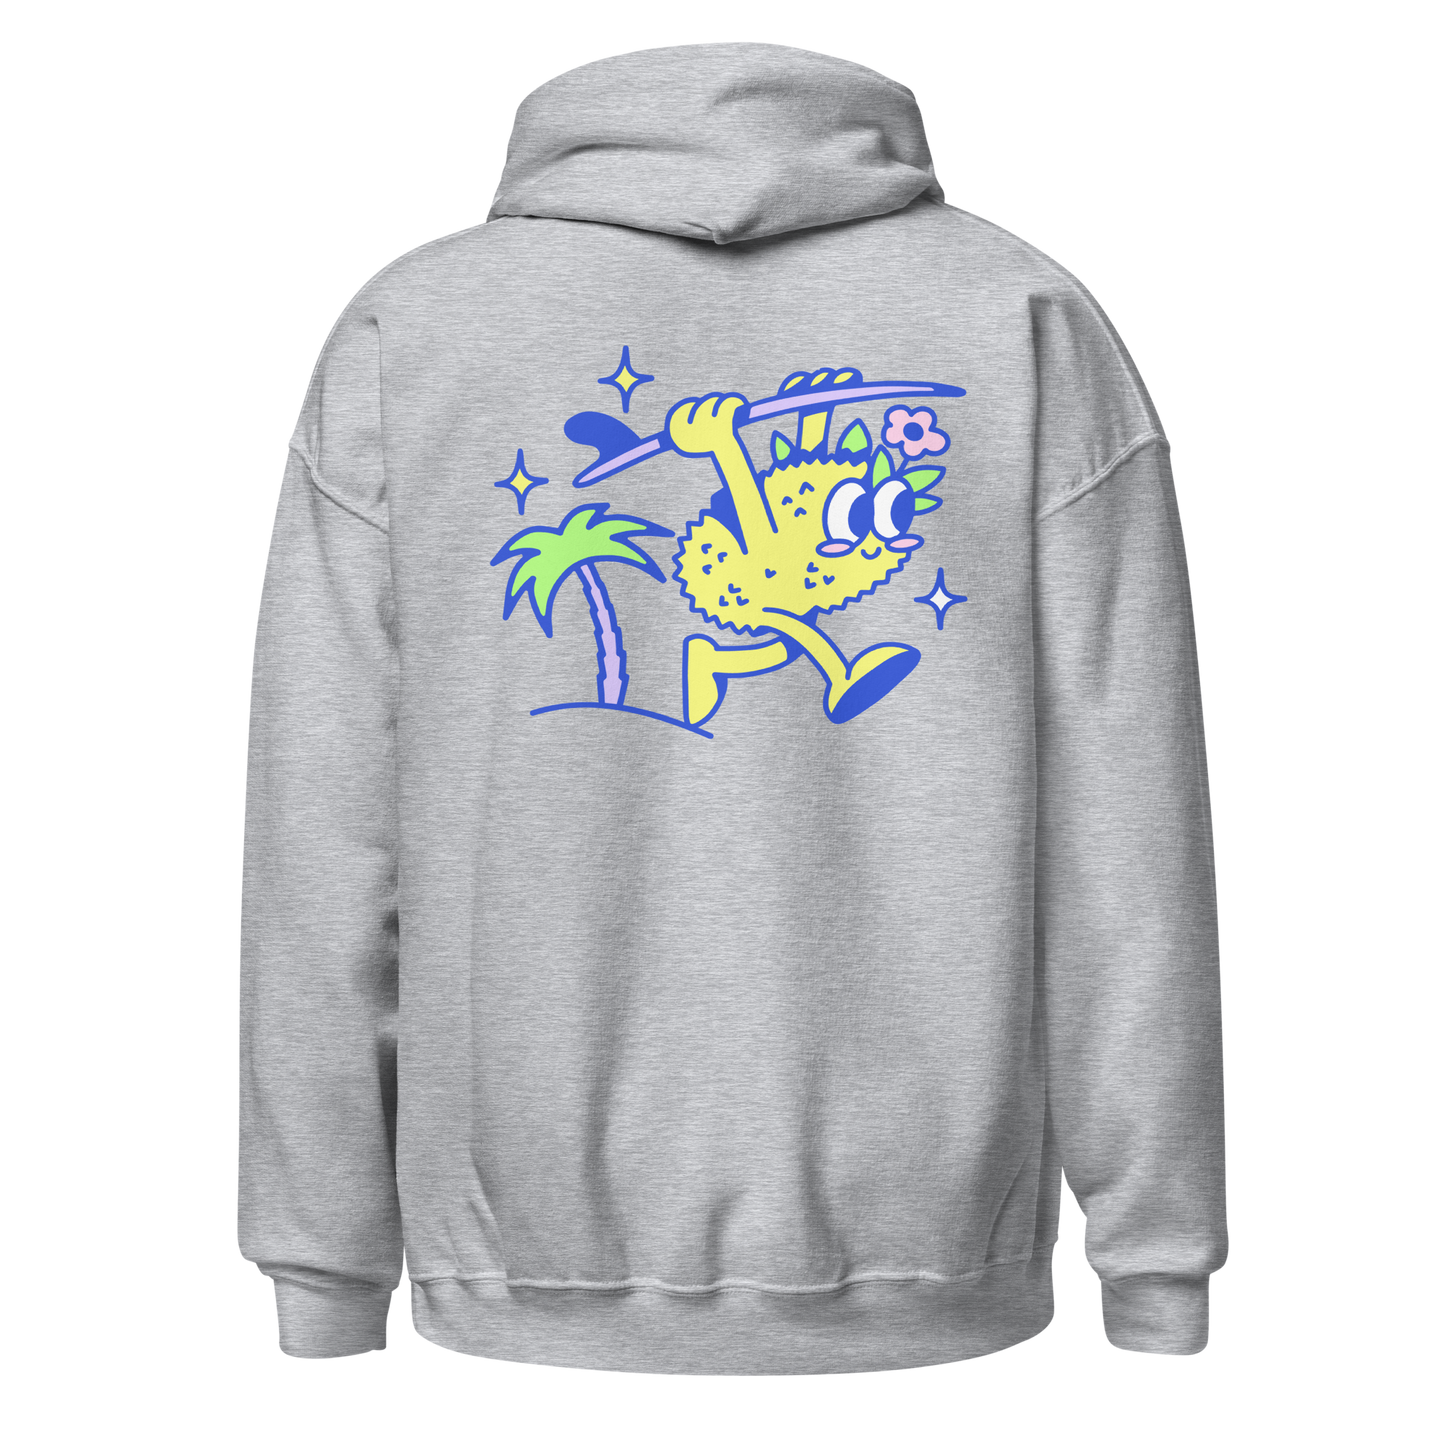 Ting's heather grey unisex hoodie with Ting's logo